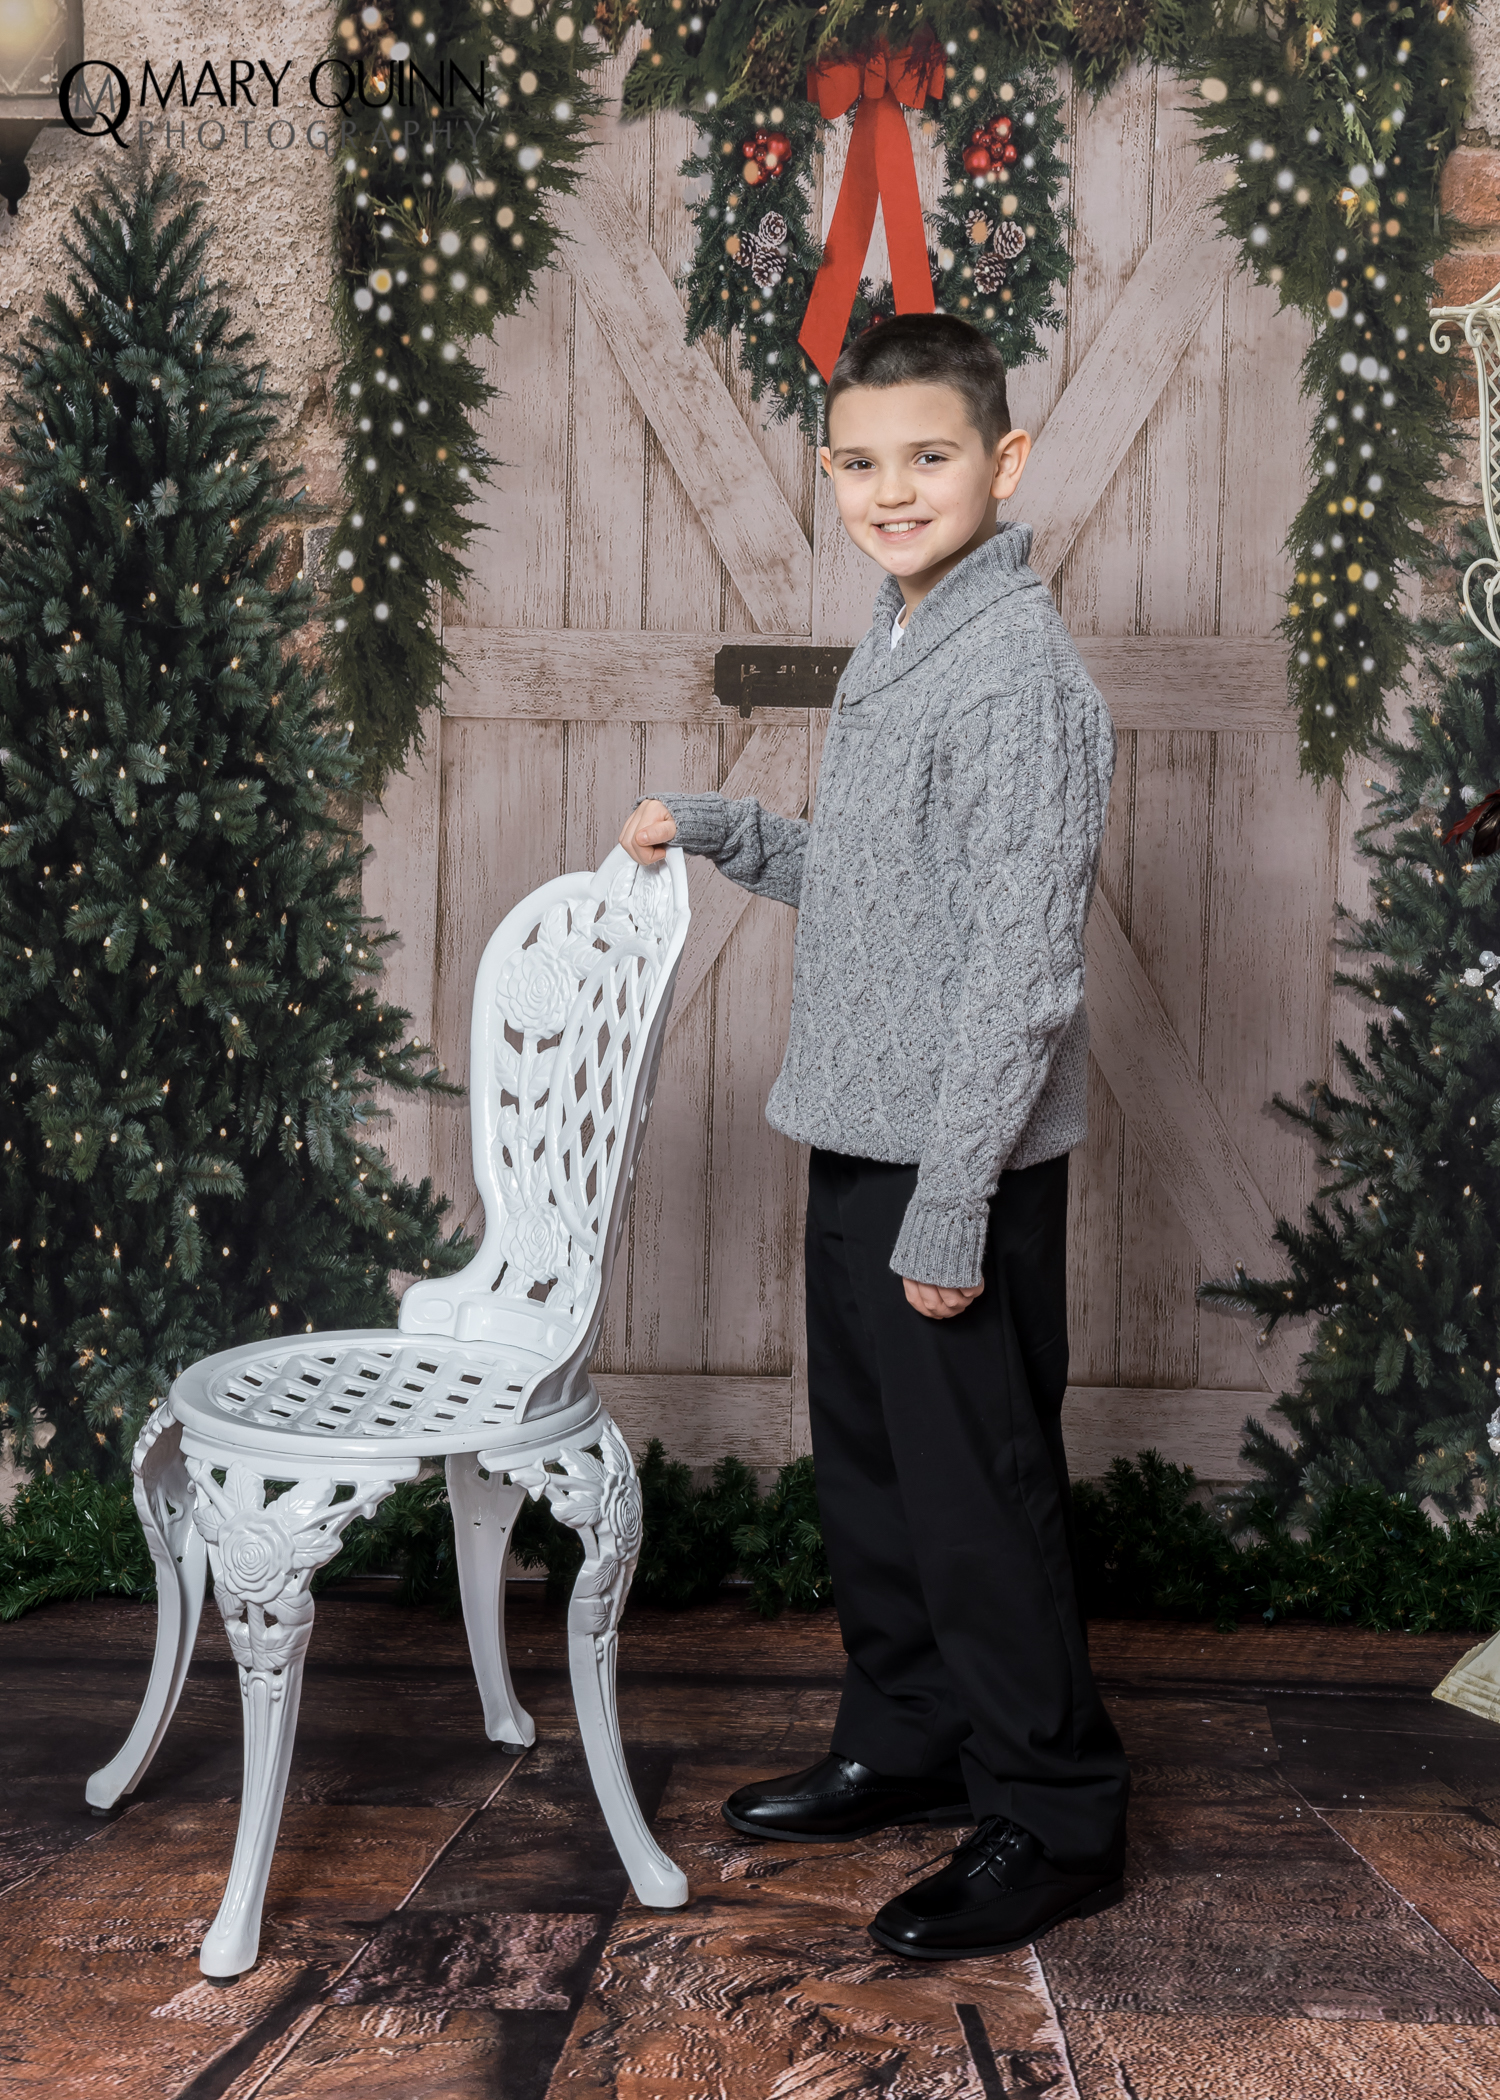 Holiday Photographer in Cherry Hill New Jersey